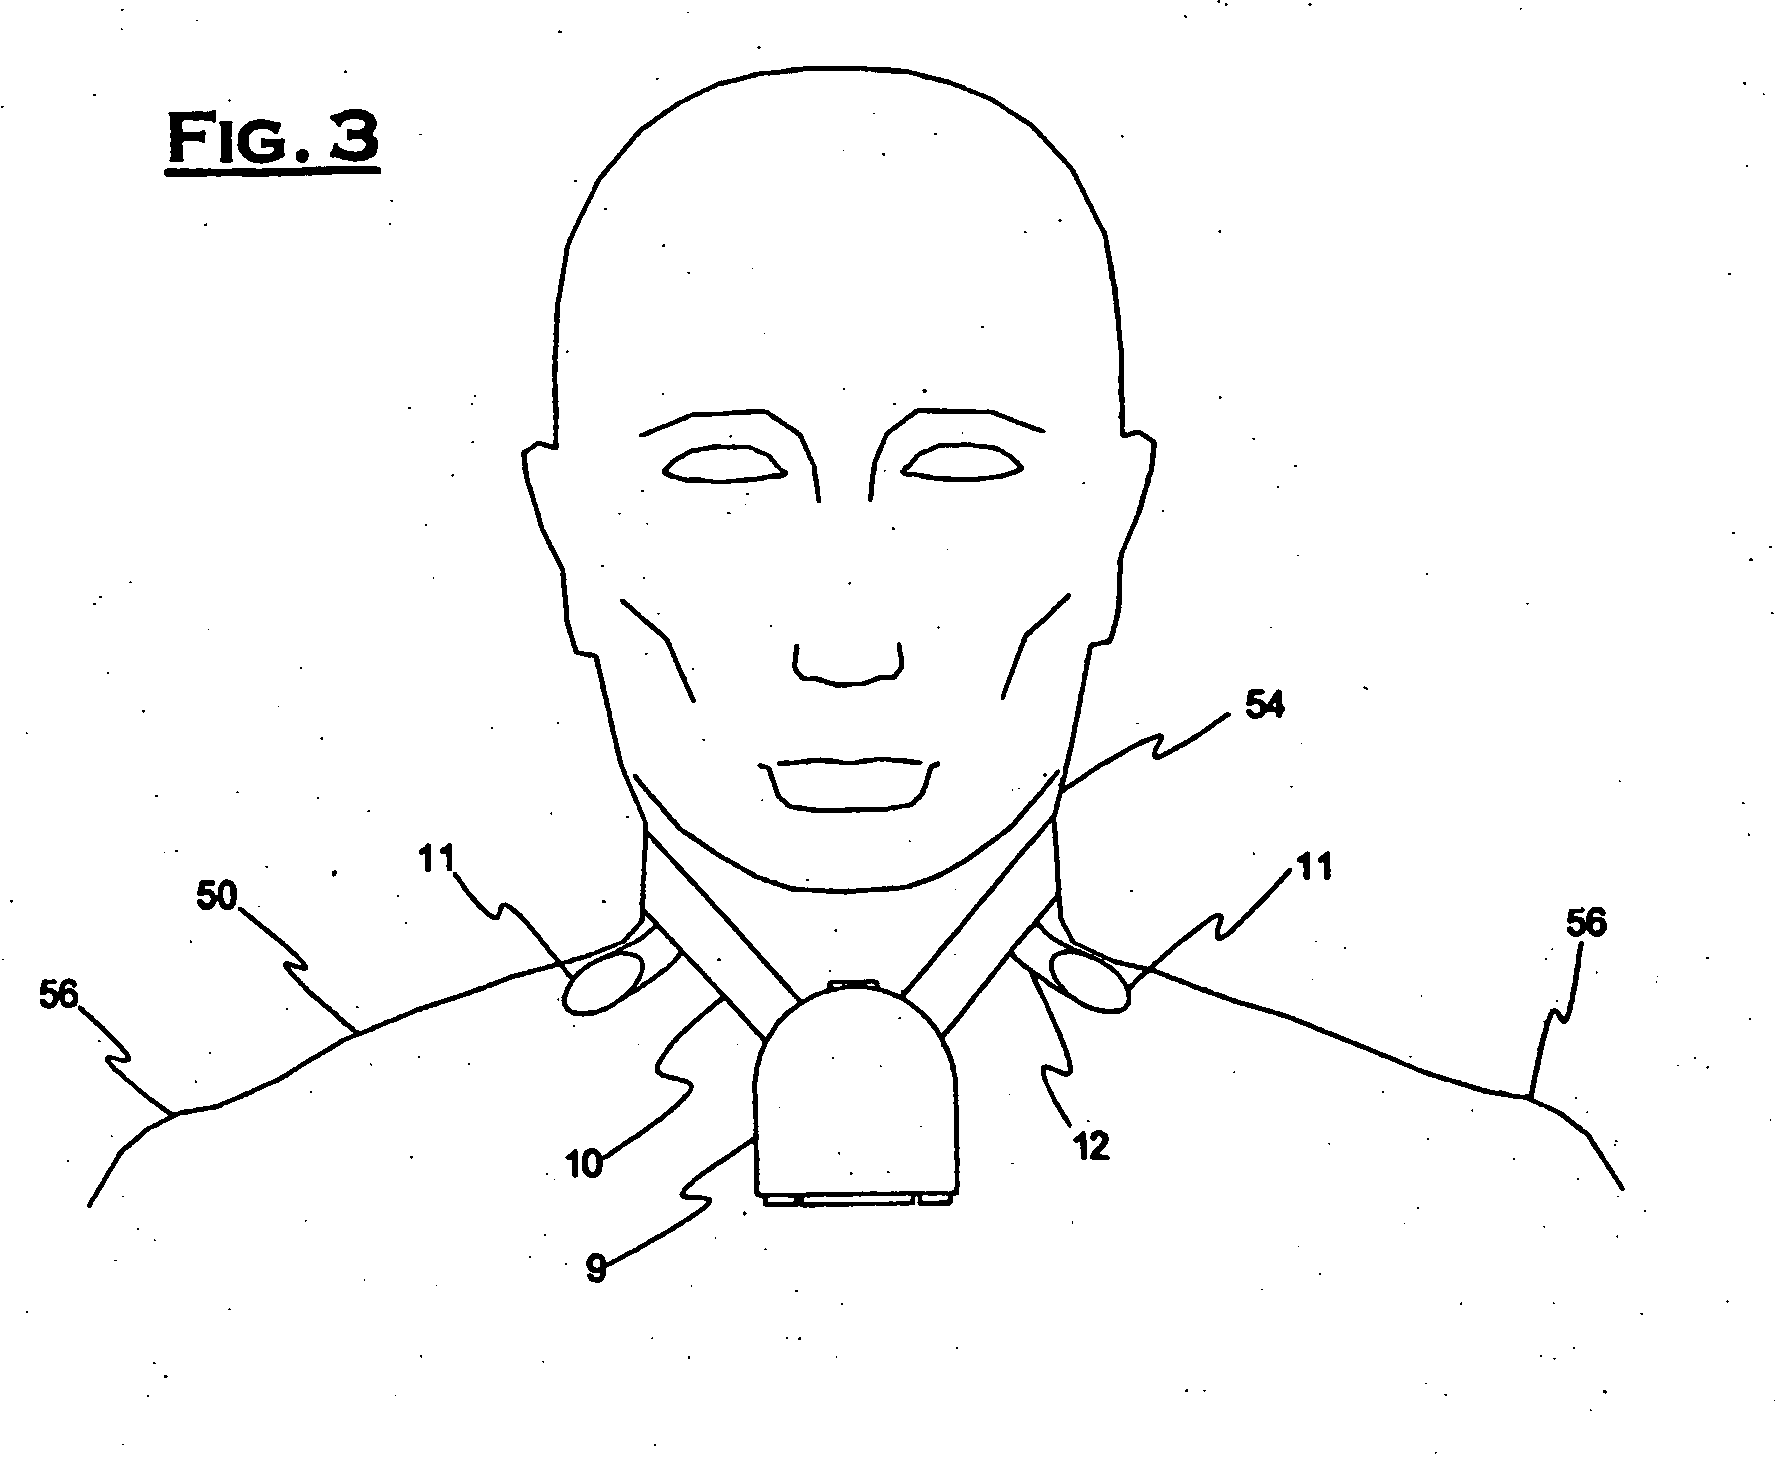 Patient-worn medical monitoring device